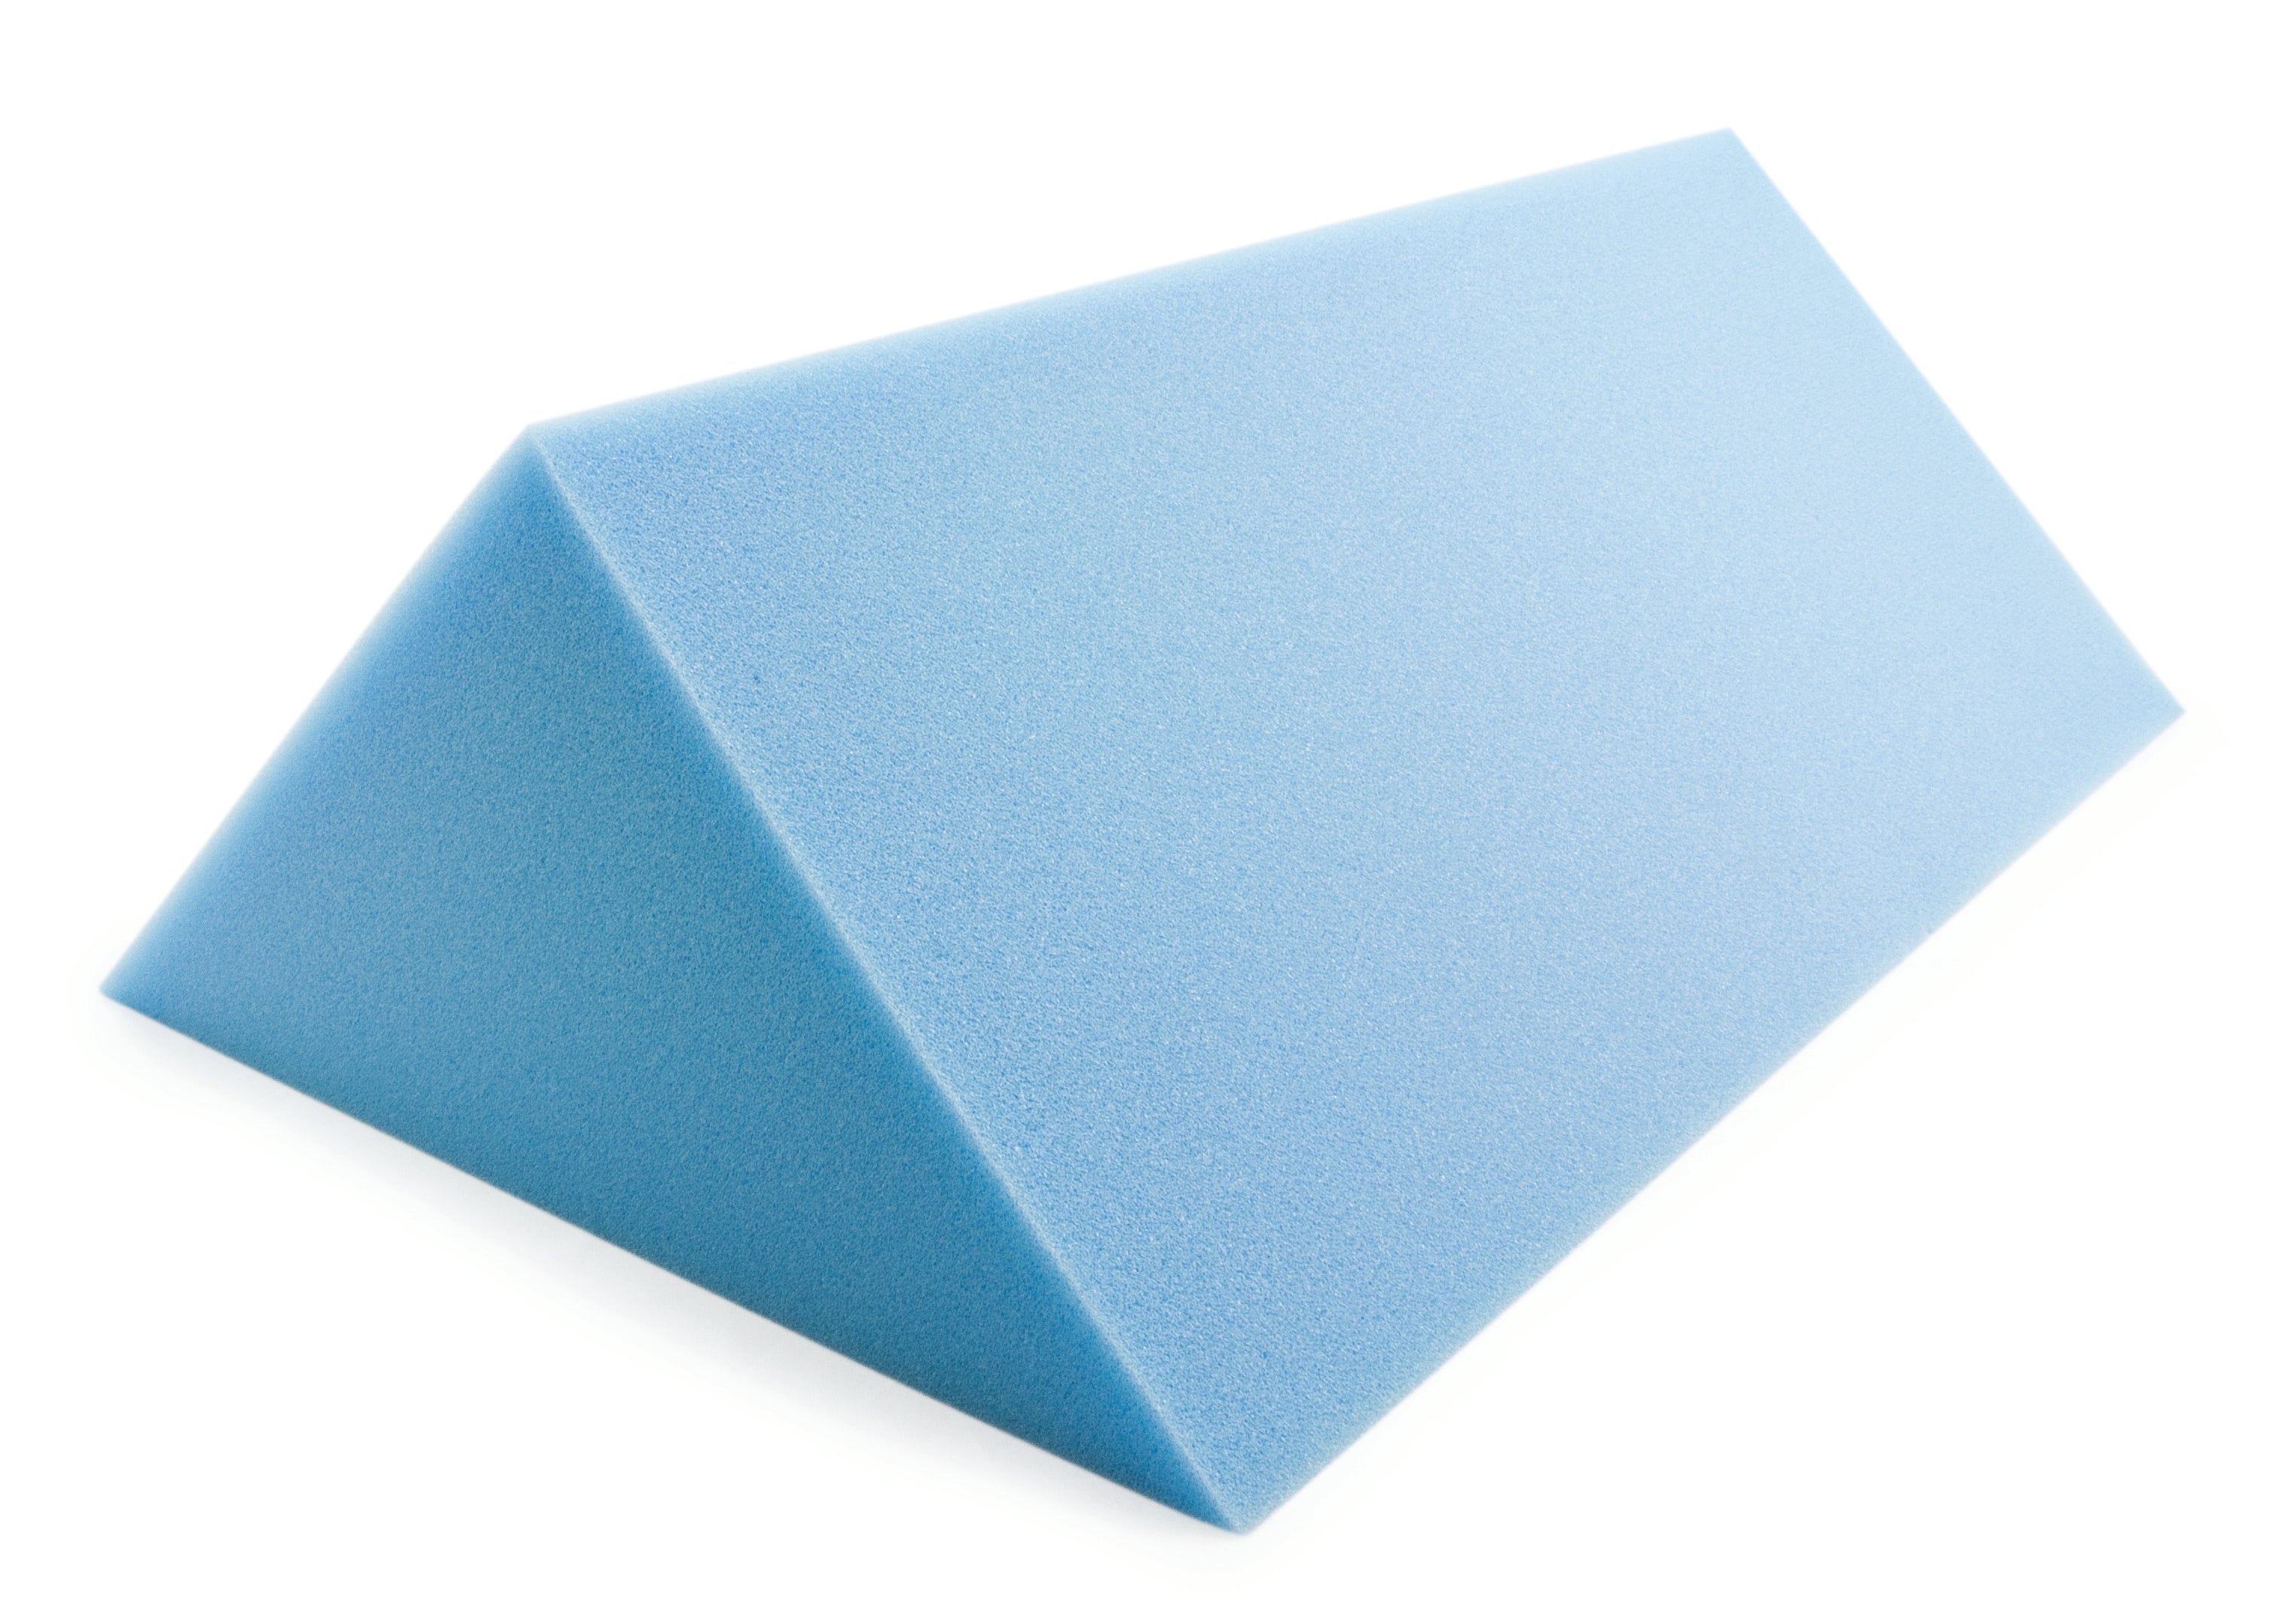 Bedroom Aids>Therapeutic Cushions - McKesson - Wasatch Medical Supply